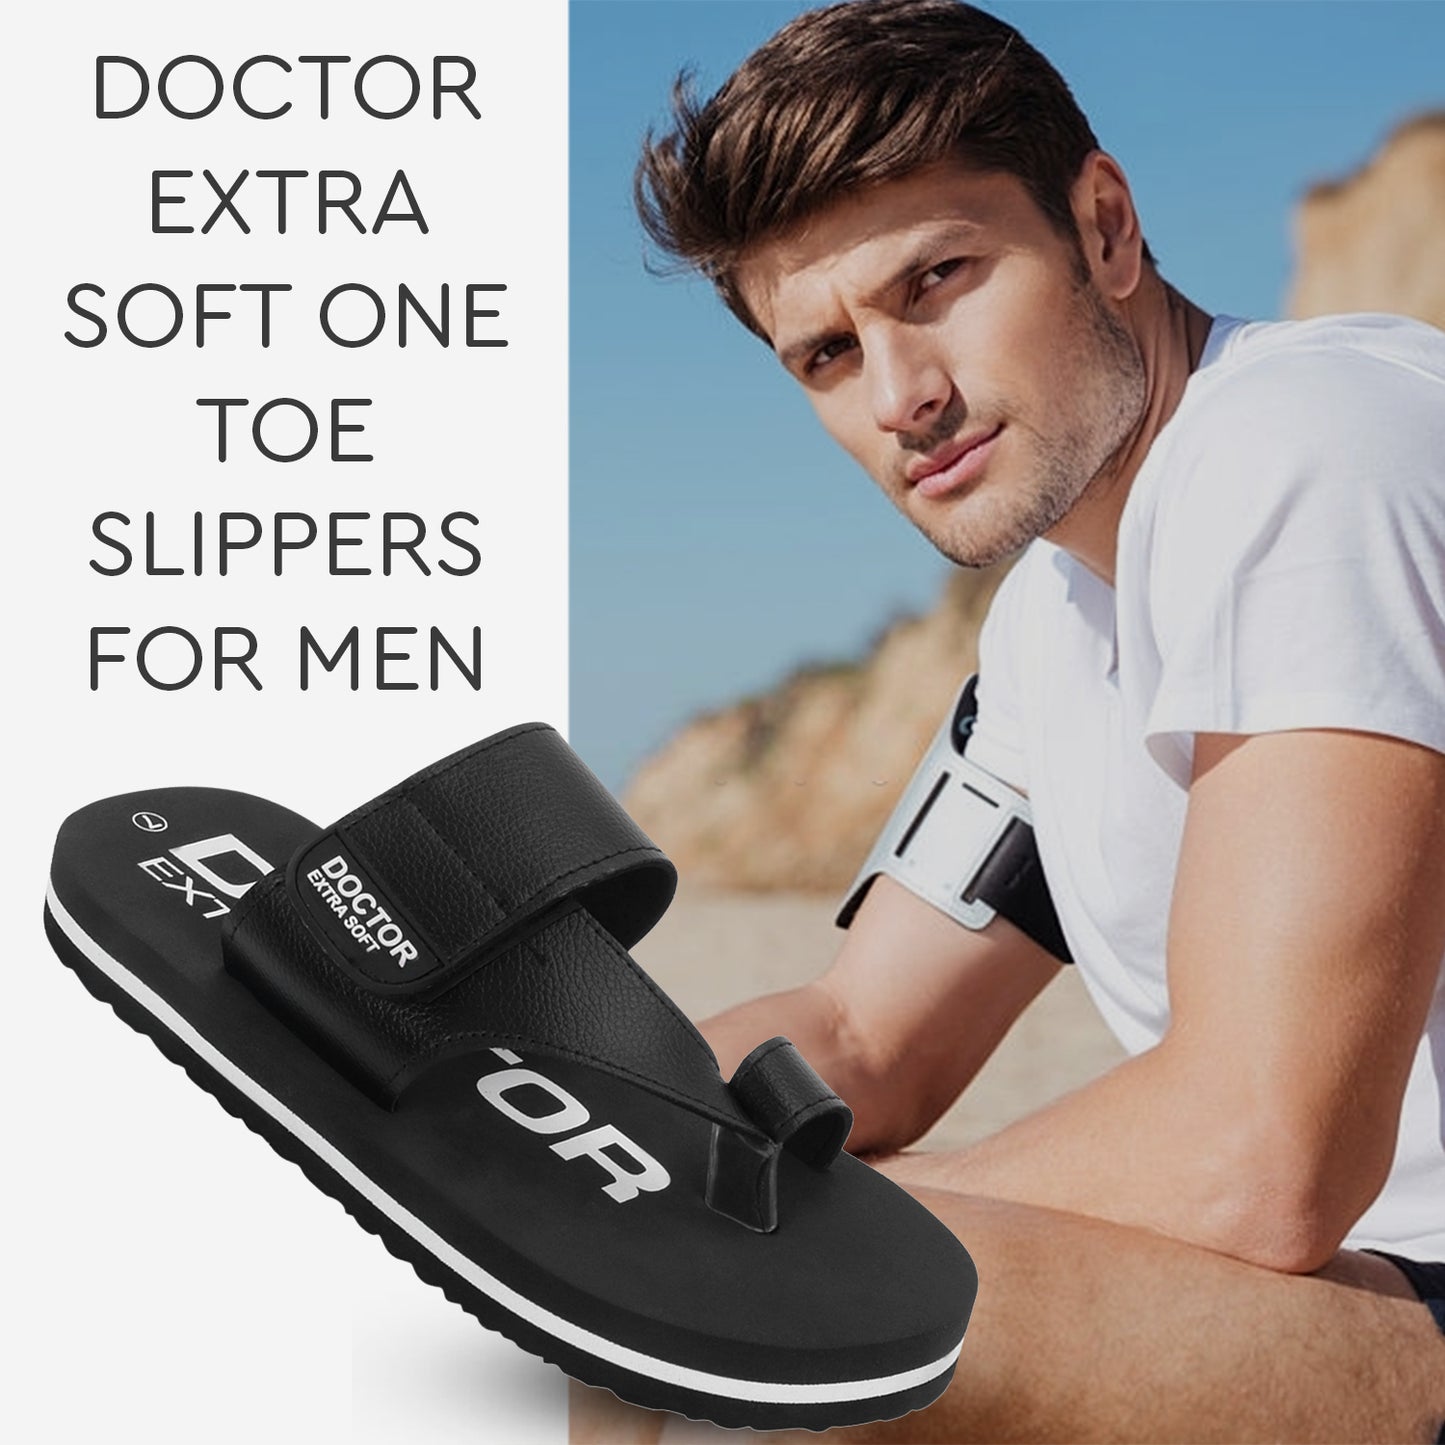 DOCTOR EXTRA SOFT D-26 One Toe Slippers for Men Ortho Care Orthopaedic Diabetic Dr Stylish House Flip-Flop & Thump Ring Slip on for Gents-Boys